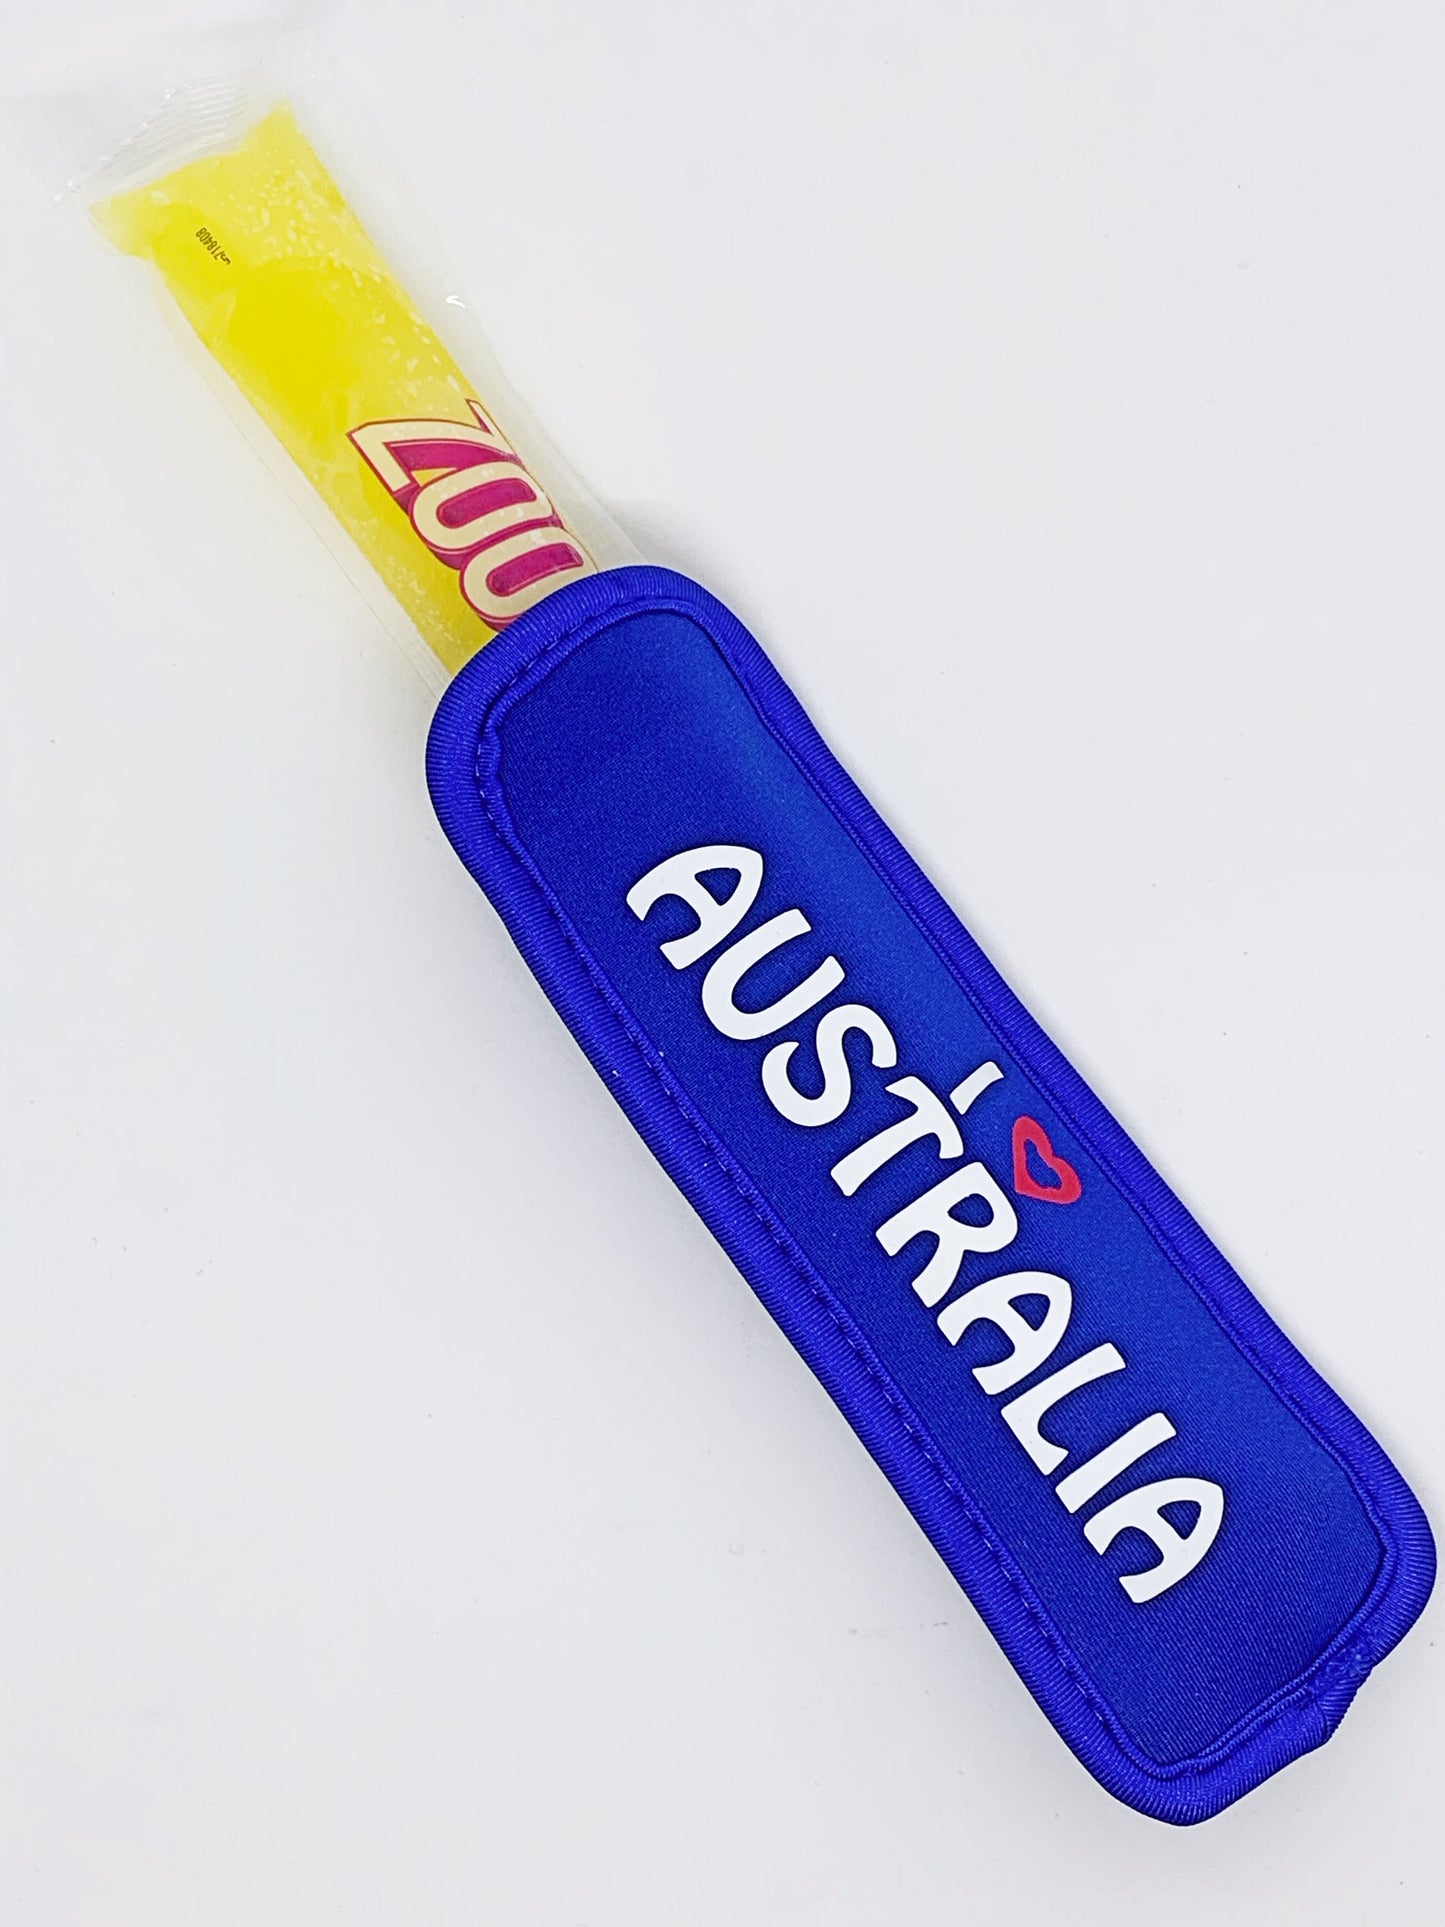 Personalised Icy Pole Holders